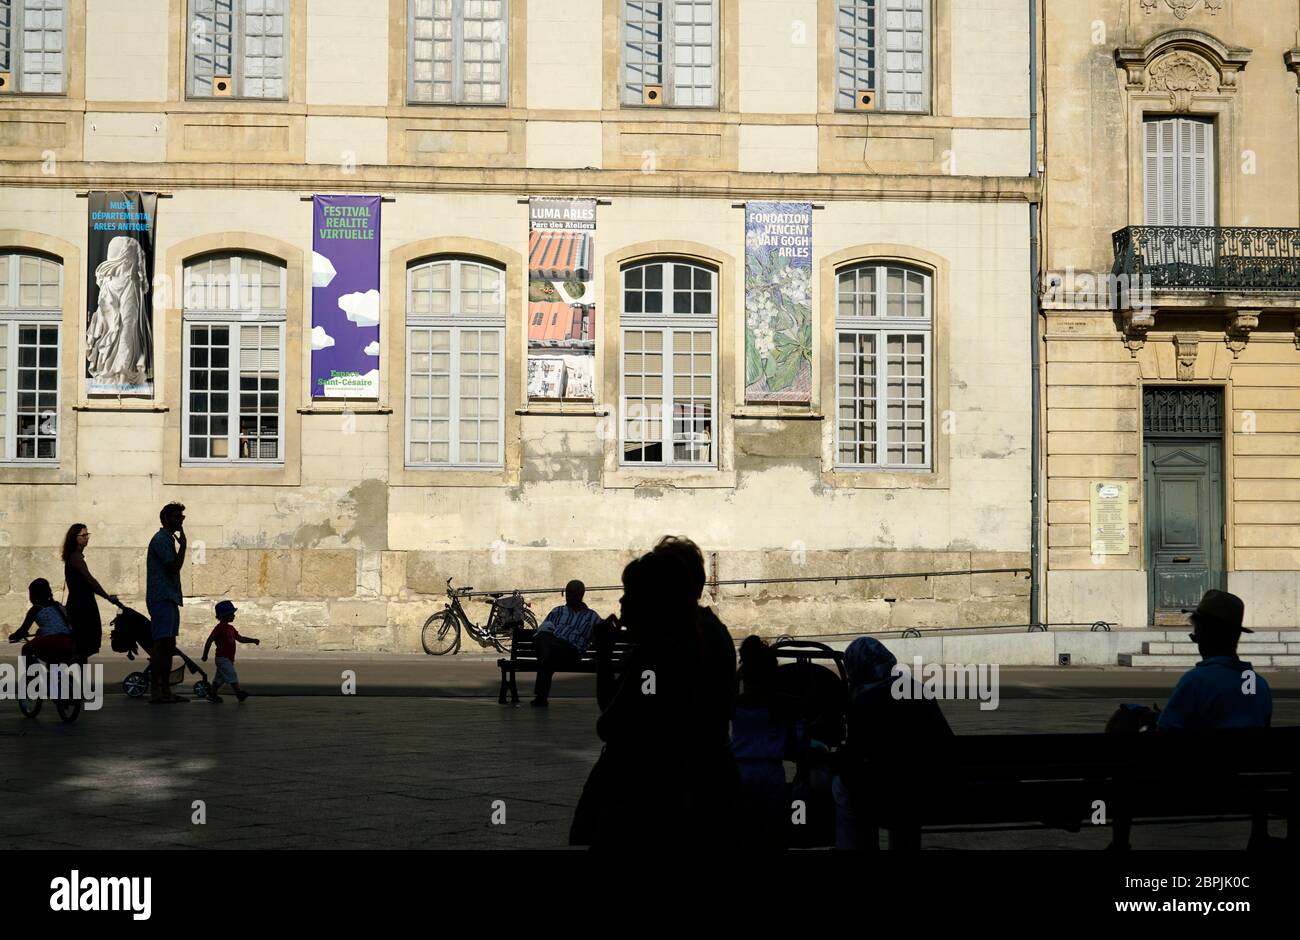 Silhouettes of people in Place de la Republique with Episcopal Palace in the background.Arles.Bouches-du-Rhone.Alpes-Cote d'Azur.France Stock Photo